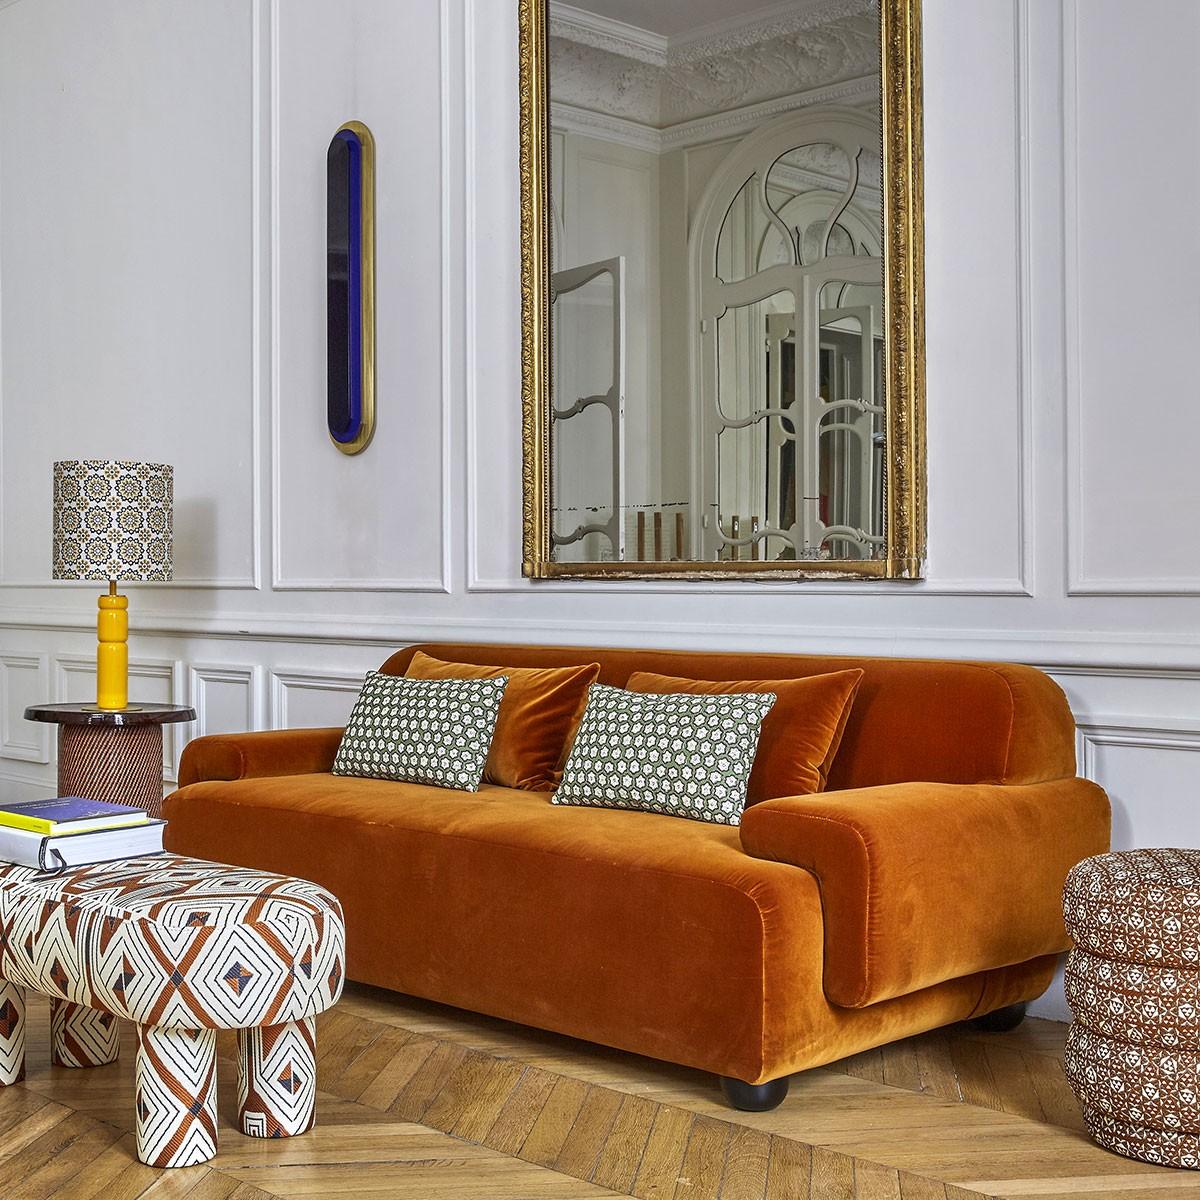 Popus Editions Lena 3-seater sofa in Beige Verone velvet upholstery

It looks like it's straight out of a movie, with its generous curves and wide armrests. It is a real invitation to spend long Sundays with the family, comfortably seated in front